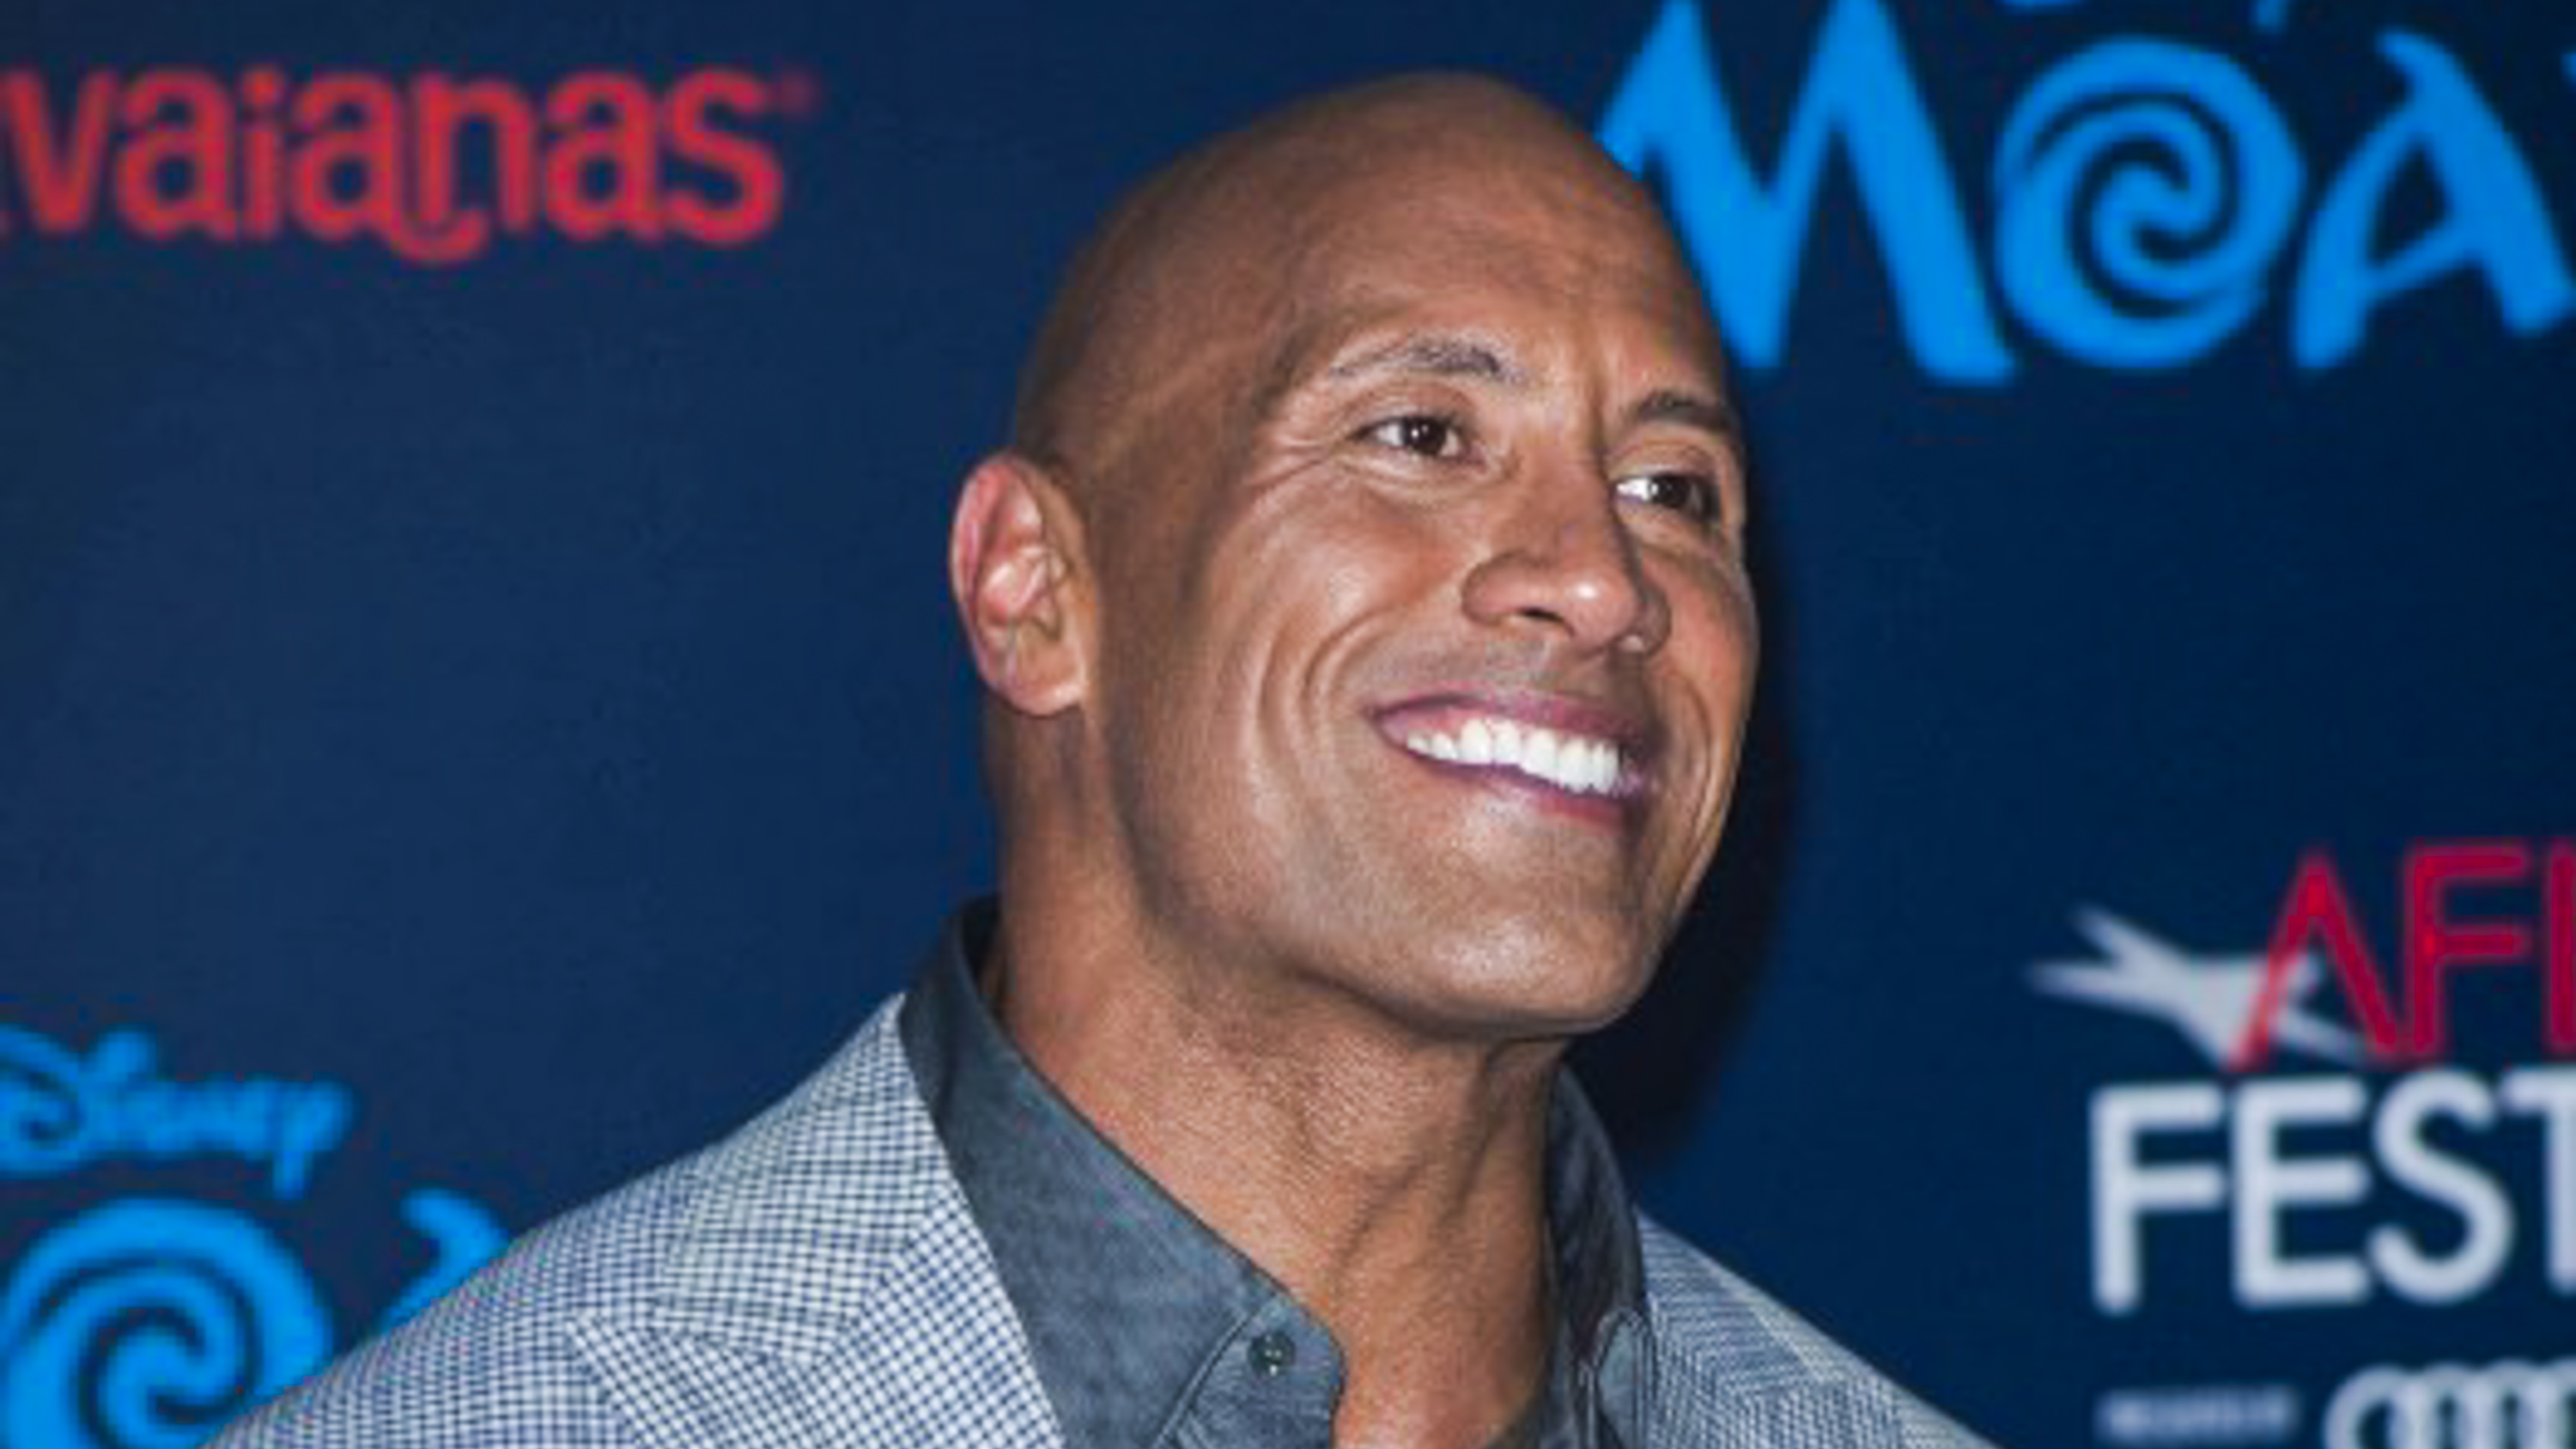 'SEXIEST MAN ALIVE.' Dwayne 'The Rock' Johnson is named 'People' magazine's 'Sexiest Man Alive' for 2016. Photo by Lilly Lawrence/AFP 